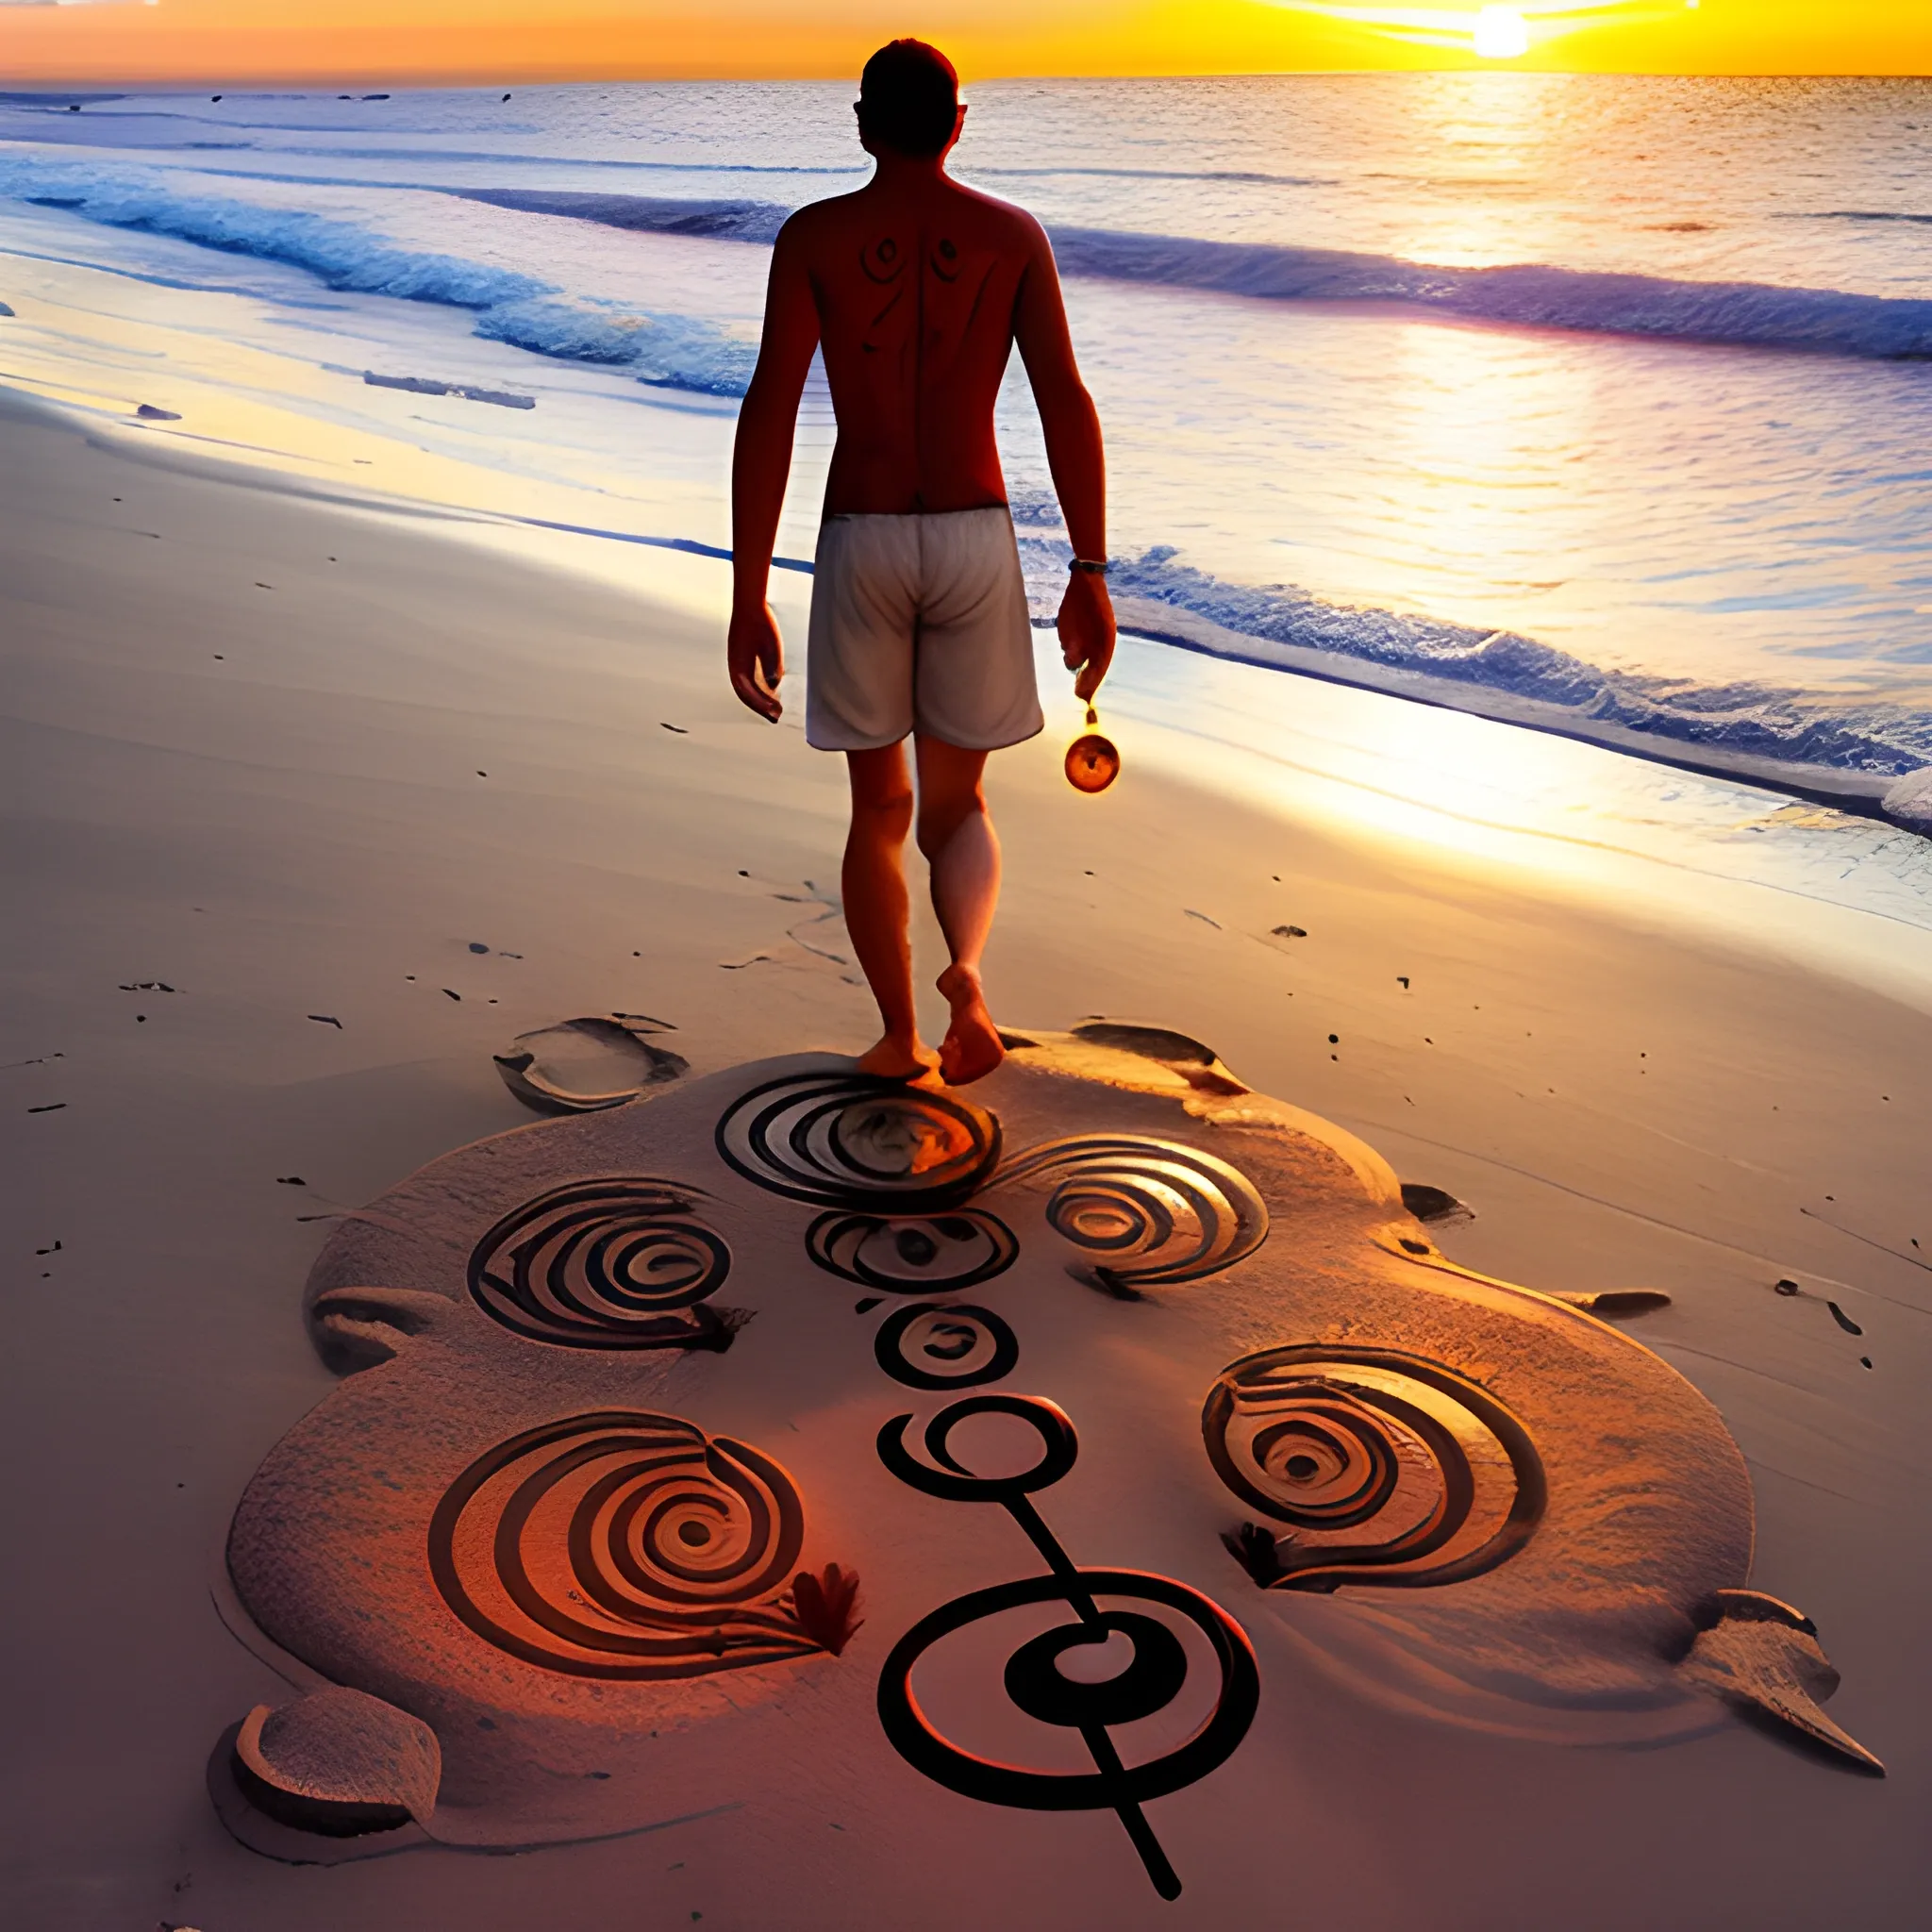 human being with the sevens chakras, beach, sunset, universe, moon, caduceus, walking to the sea, initiation, footprints in the sand


